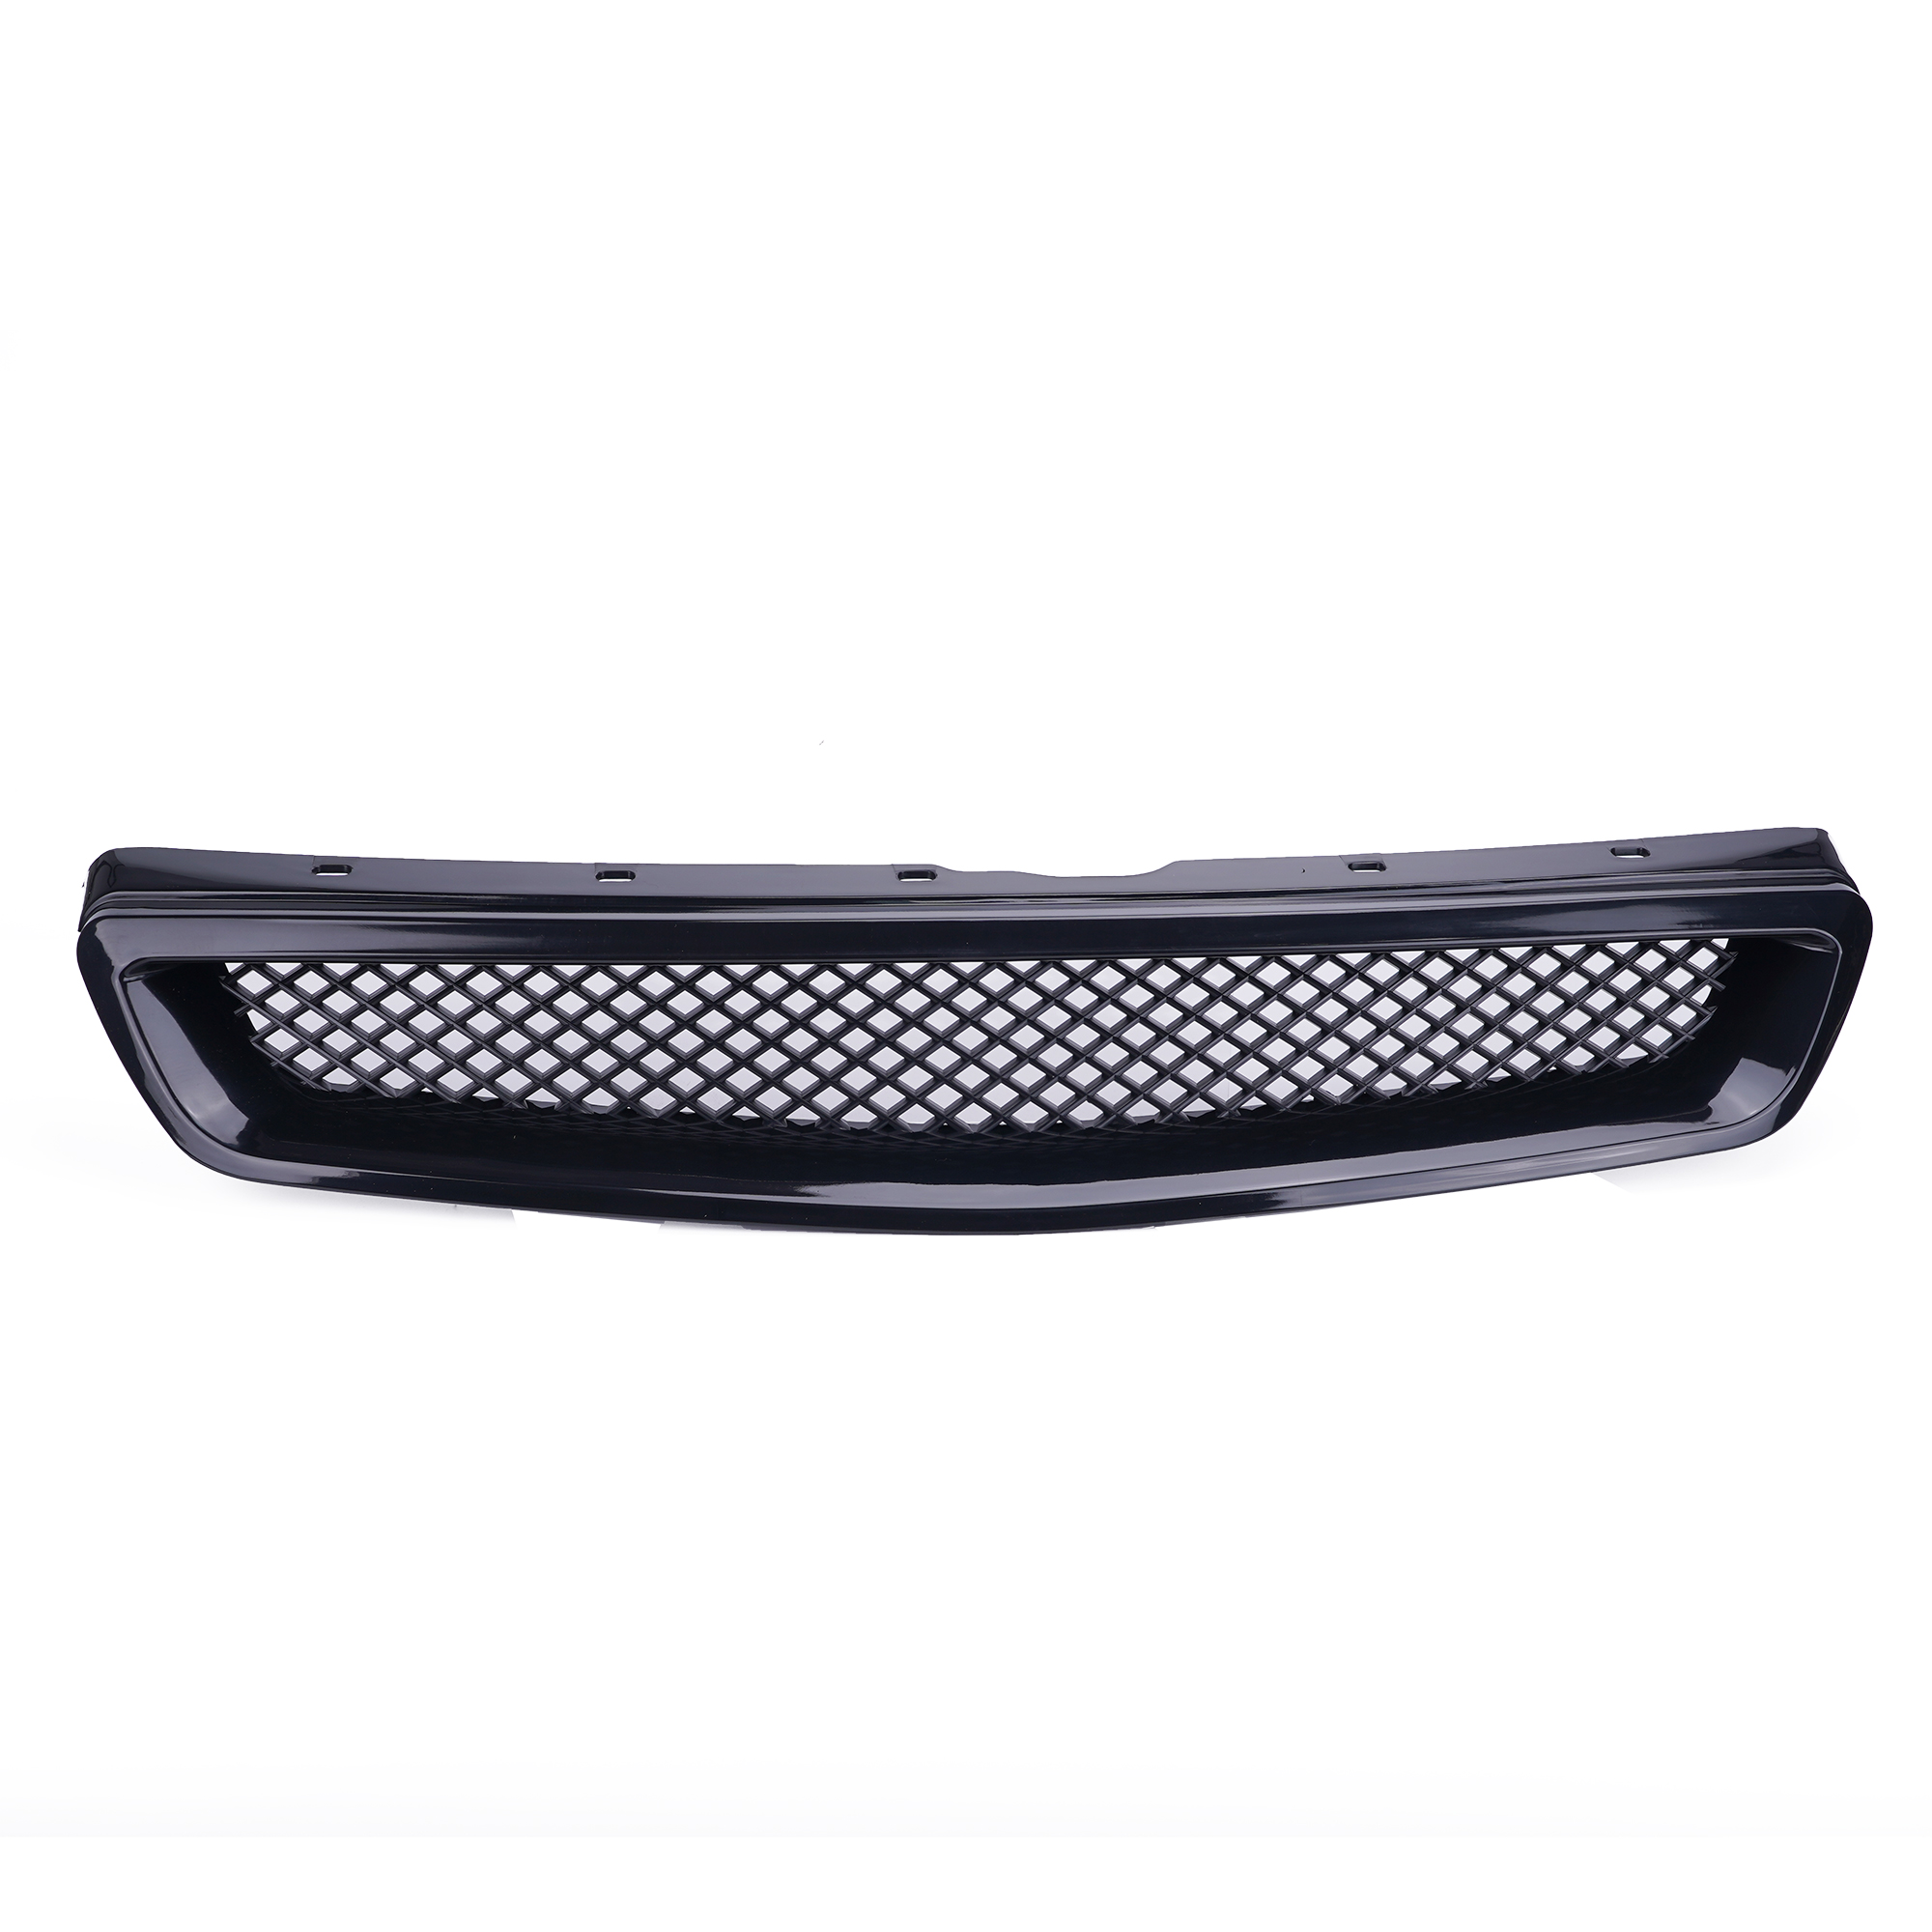 GRILLE FOR HONDA CIVIC 1999